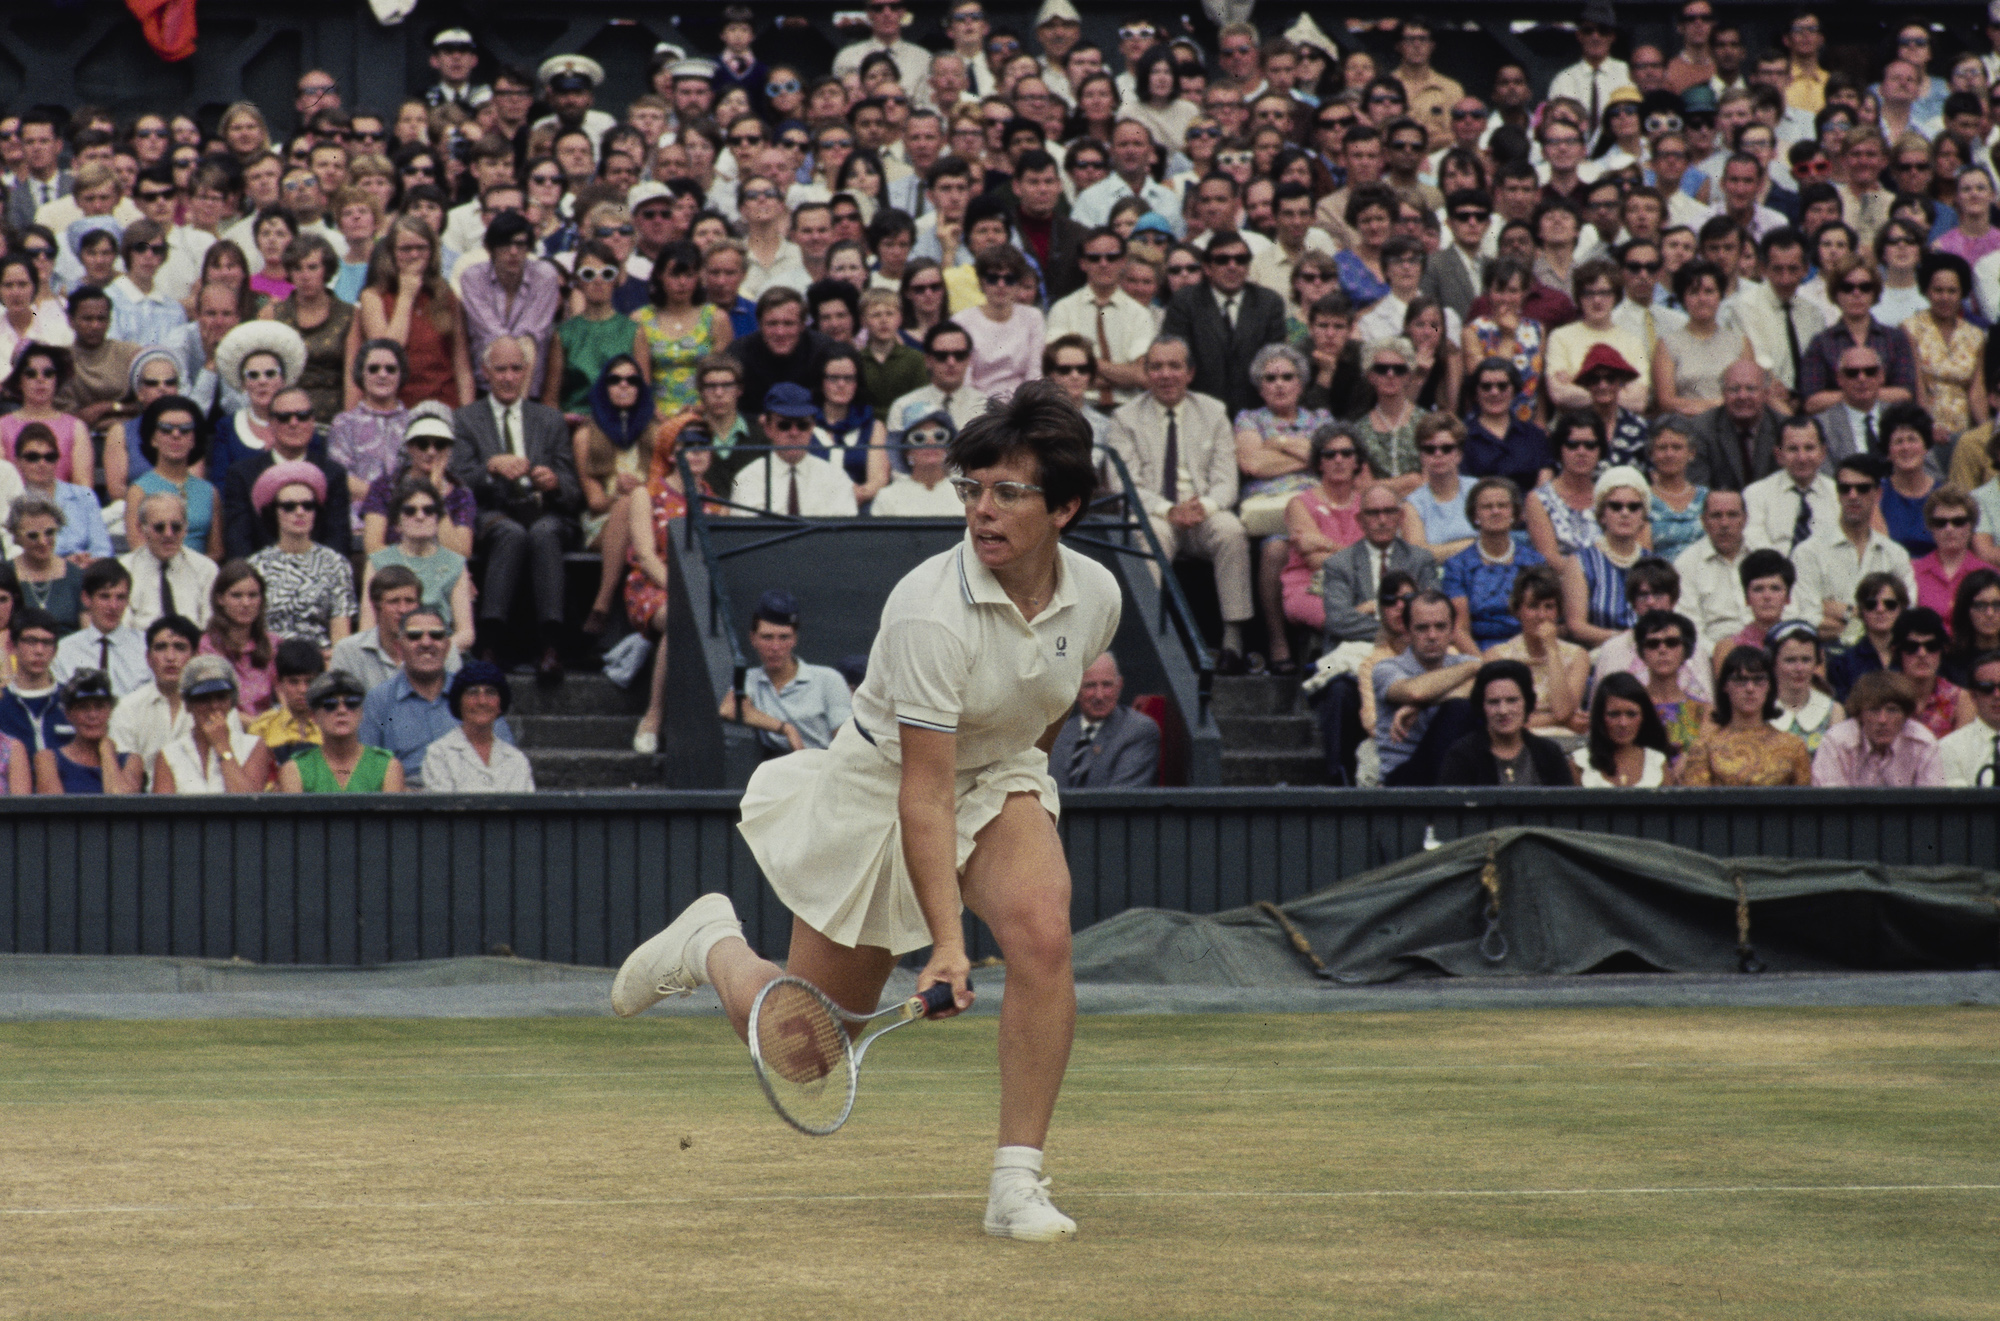 Battle of the Sexes: Billie Jean King Admitted That Beating a ’55-Year-Old Guy Was No Thrill’